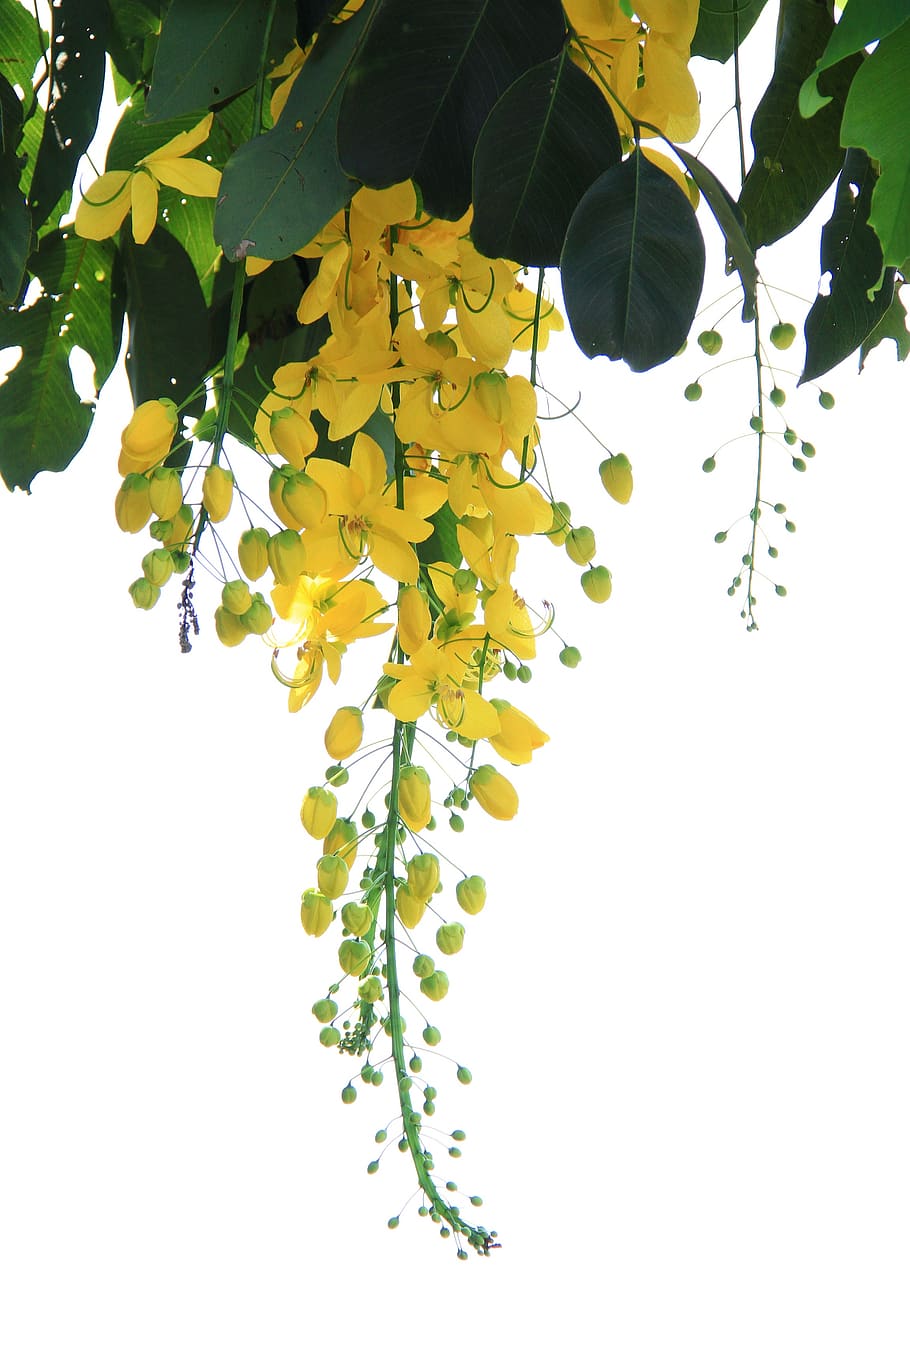 background, leaf, plant, nature, arbor le, gold pelting rain, string, vertical only, yellow, summer